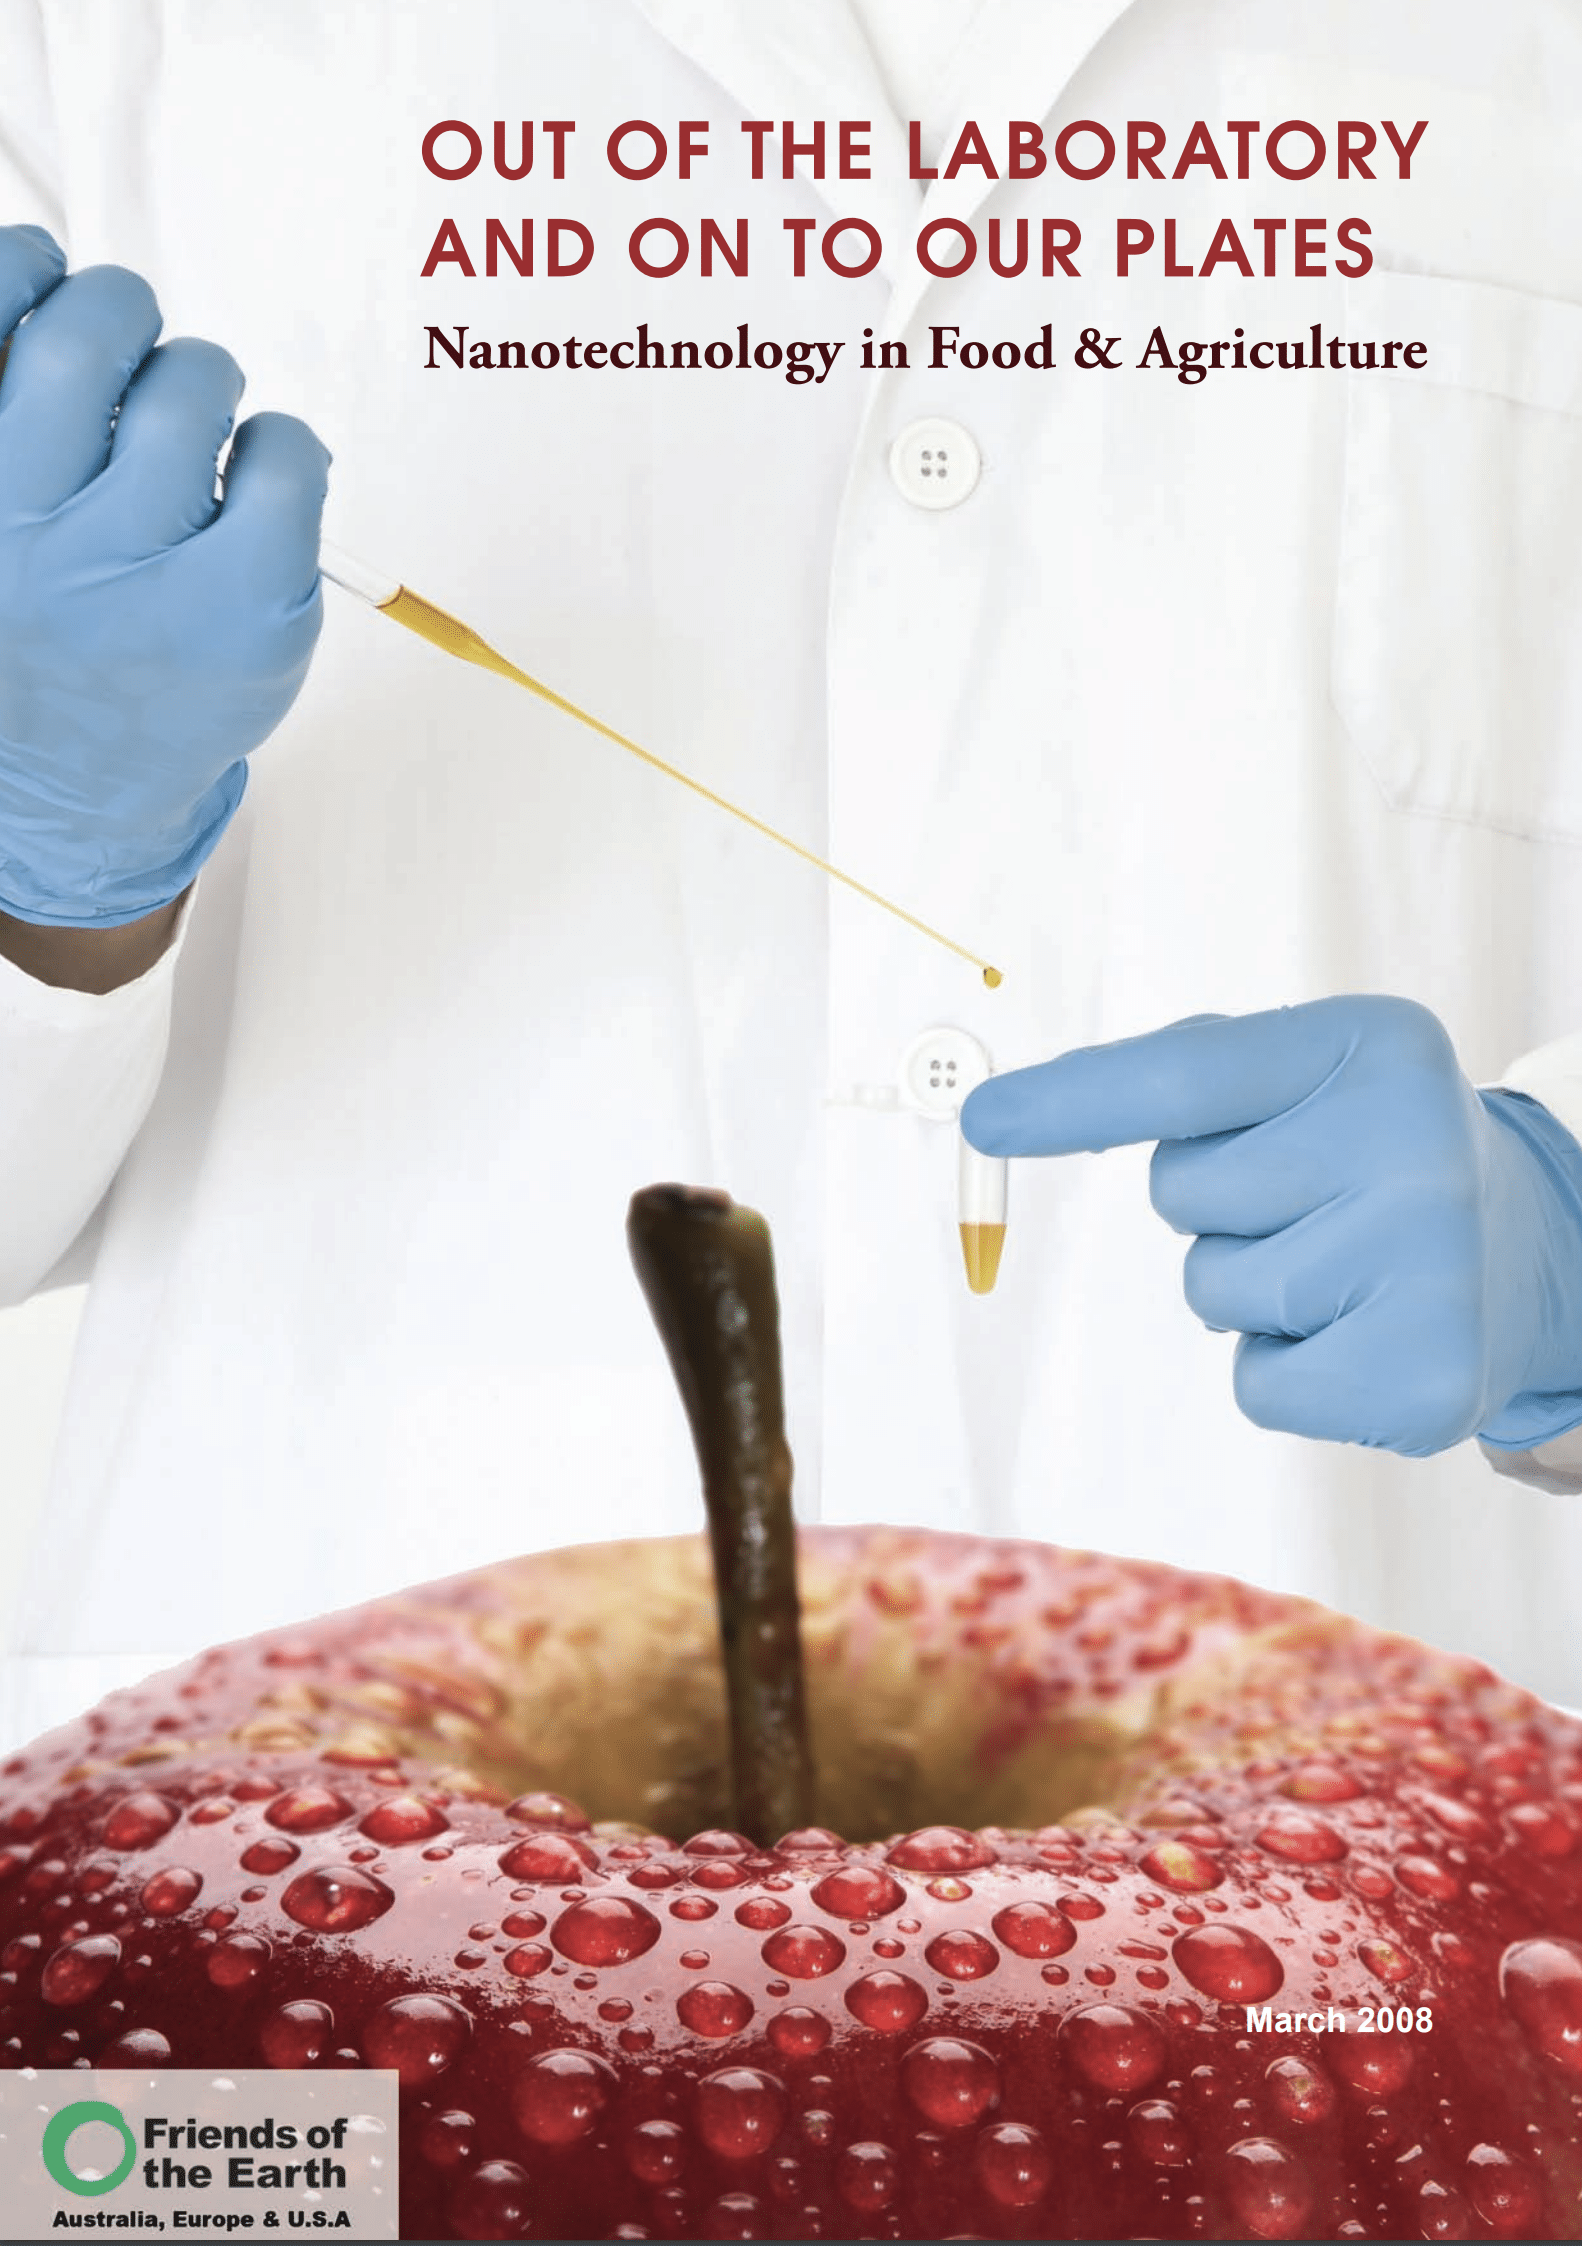 Out of the laboratory and onto our plates: Nanotechnology in food & agriculture